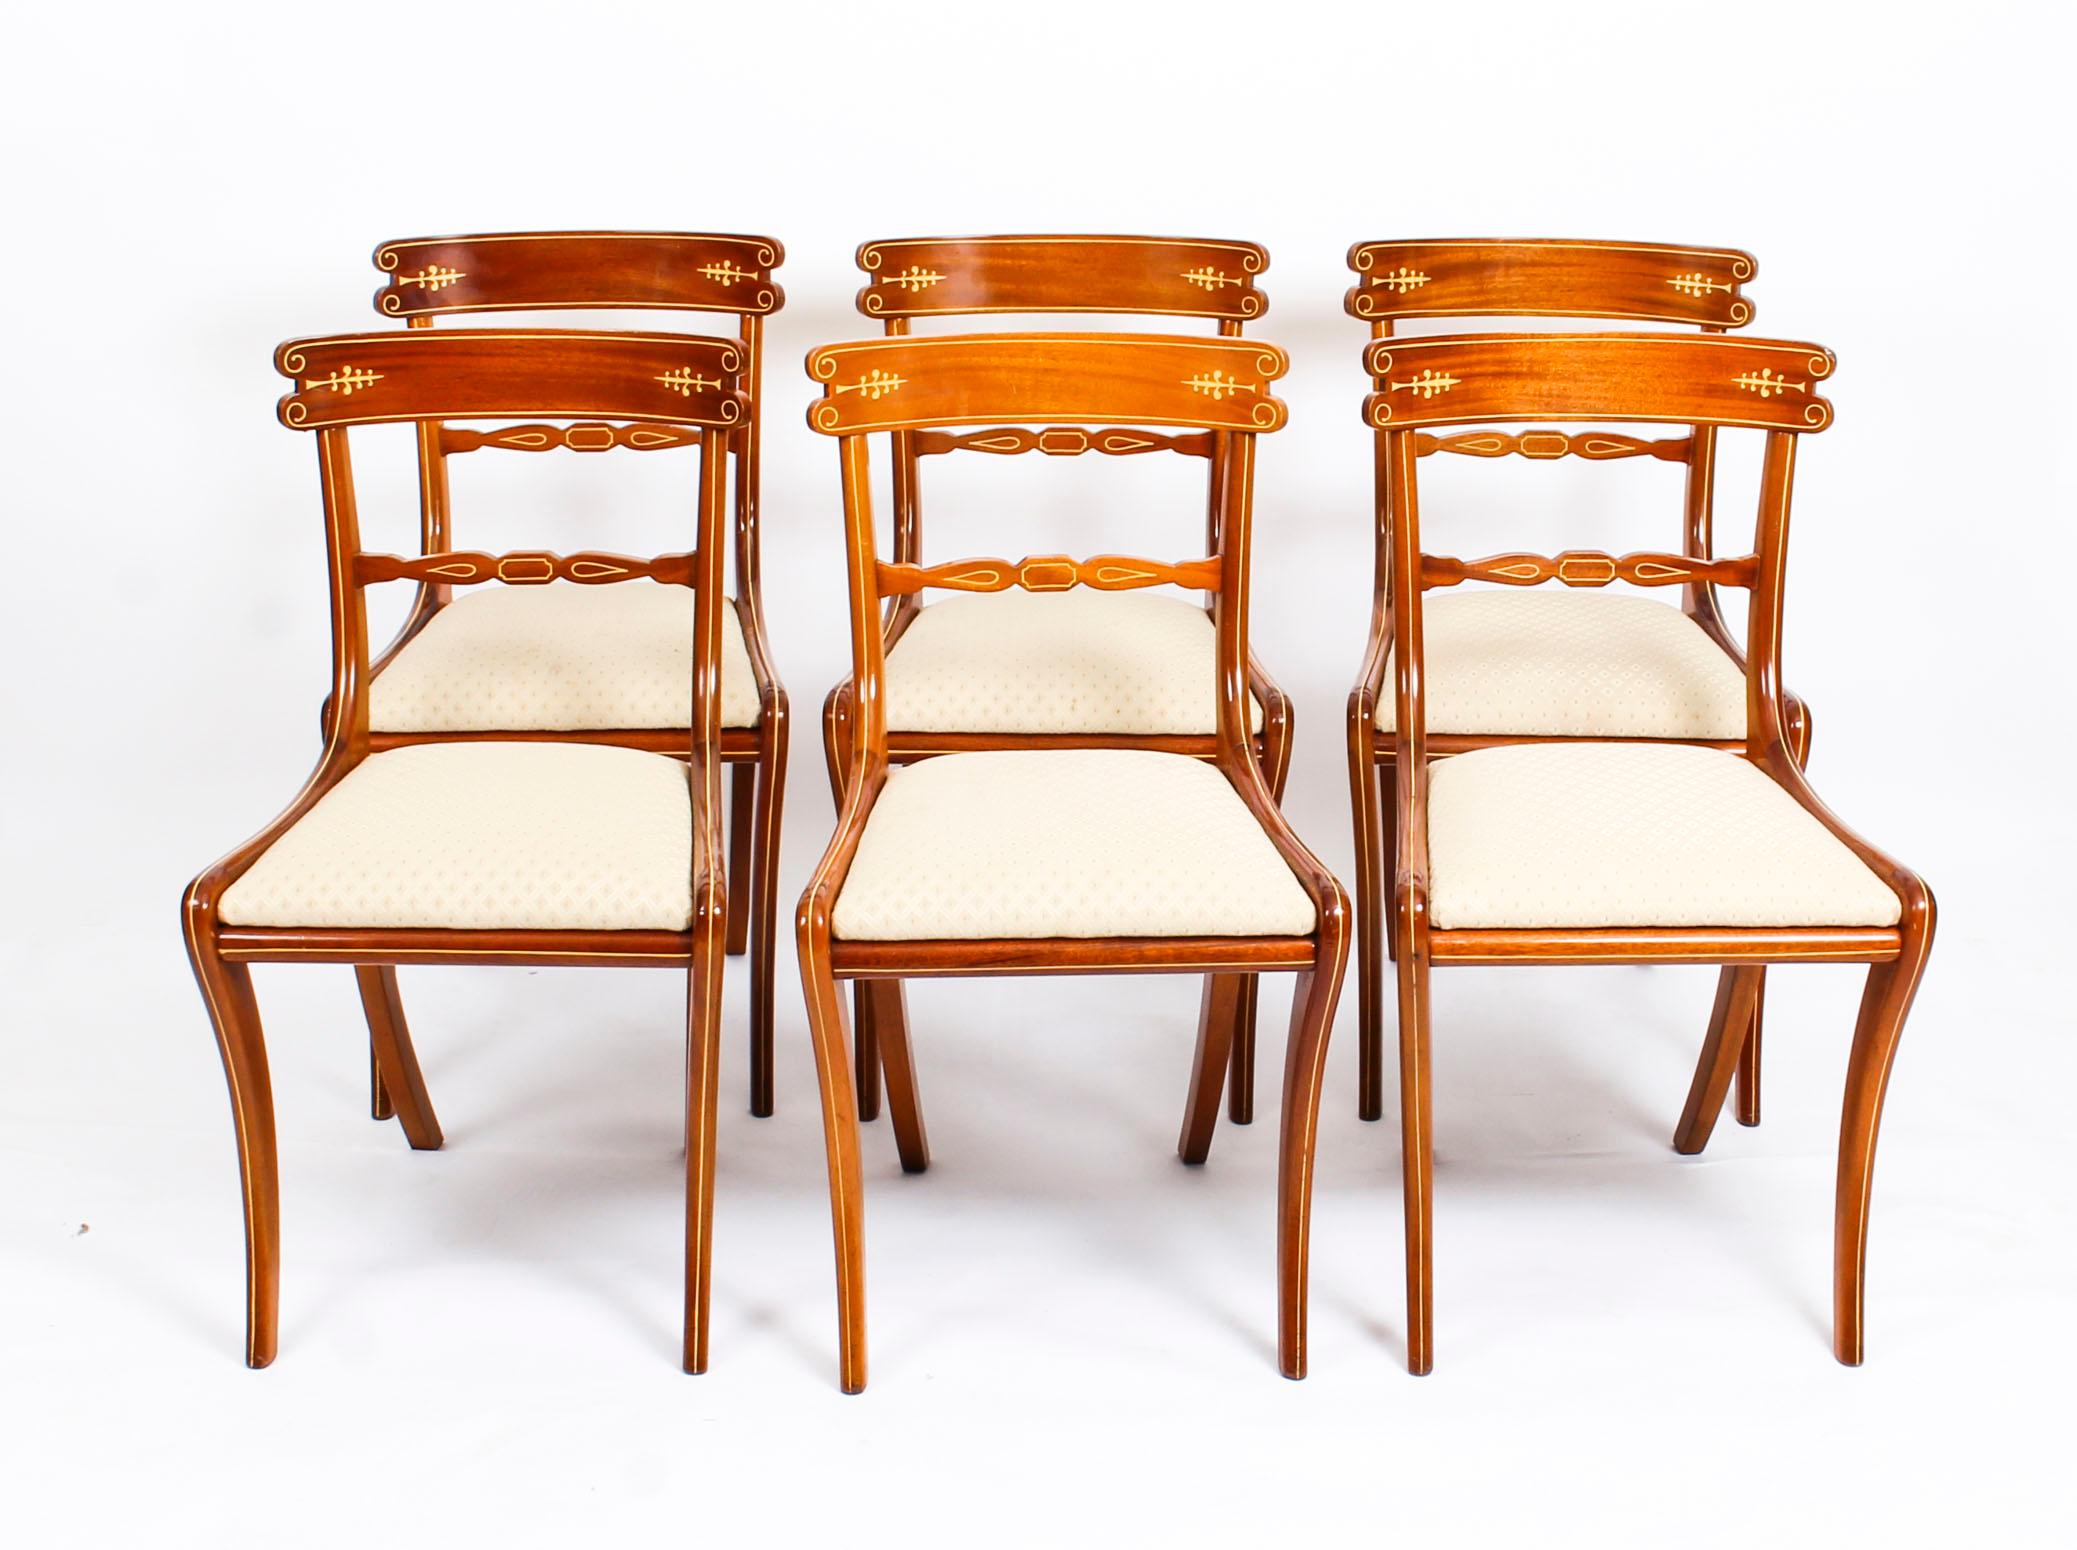 William Tillman Regency Dining Table and 6 Regency Style Chairs, 20th Century 6